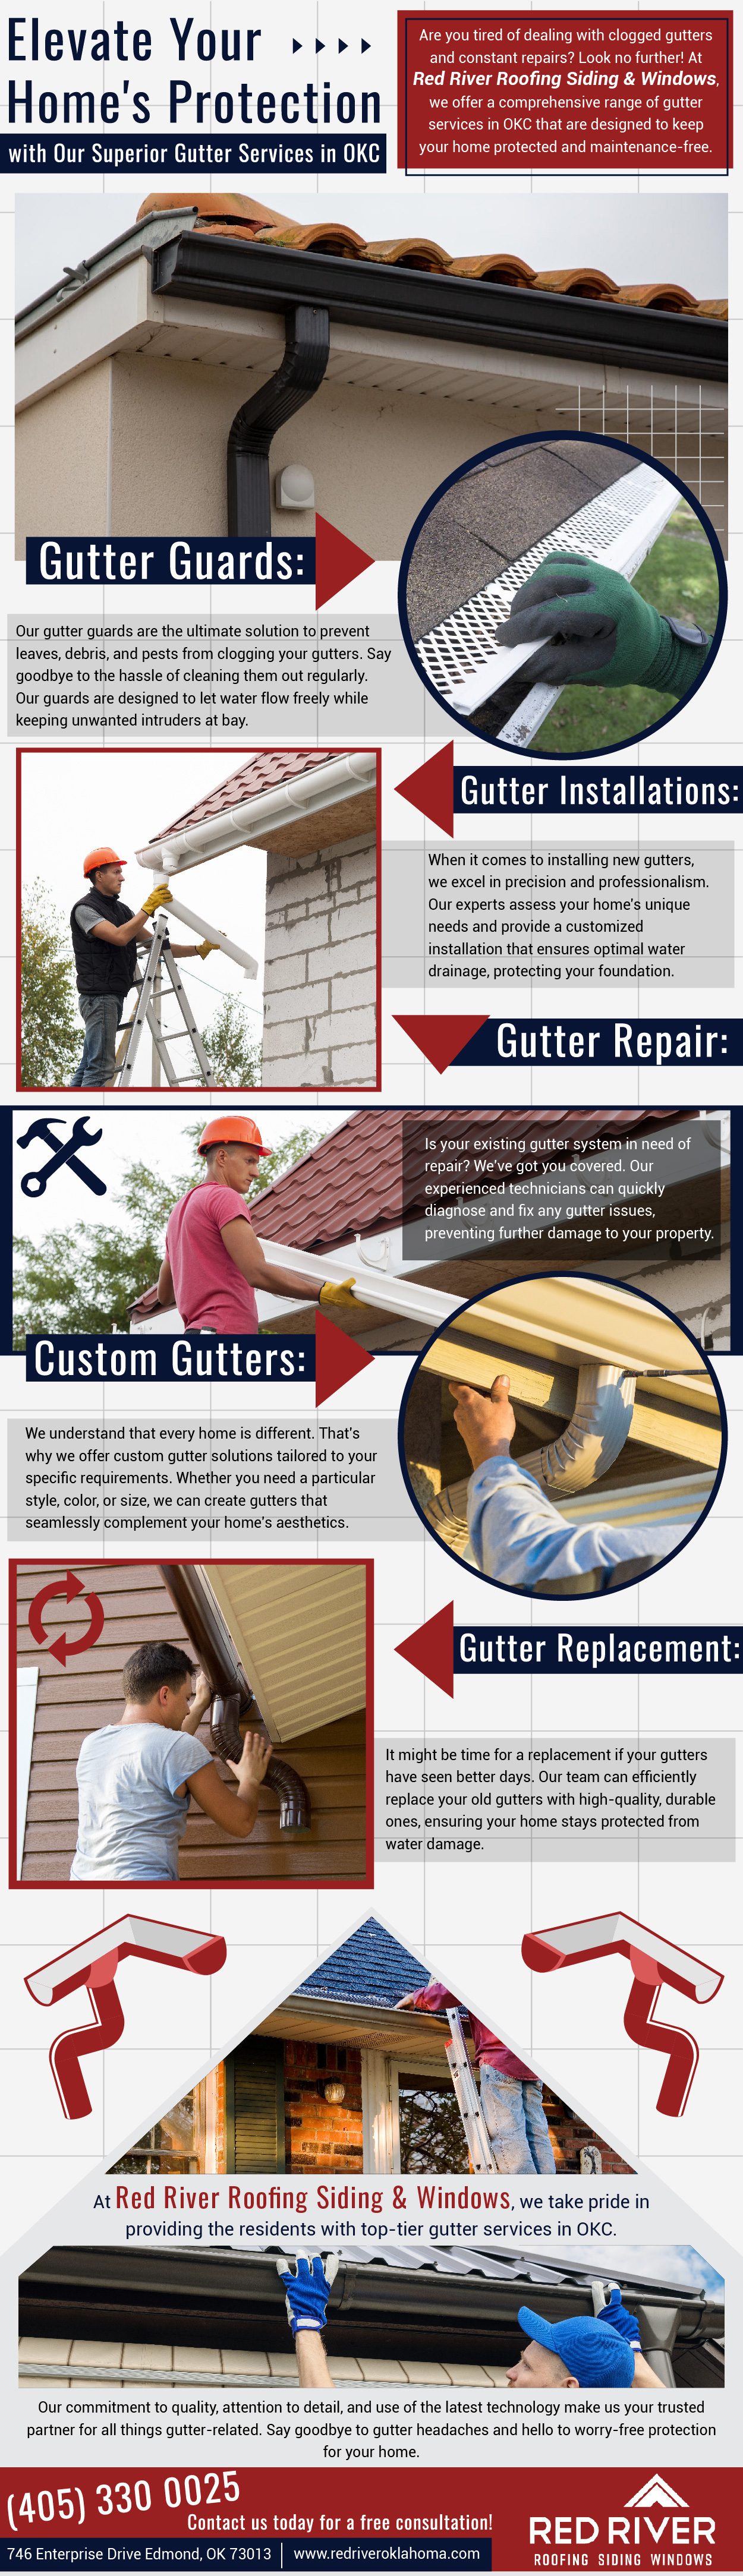 Gutter Services in OKC from Re River Roofing, Siding & Window